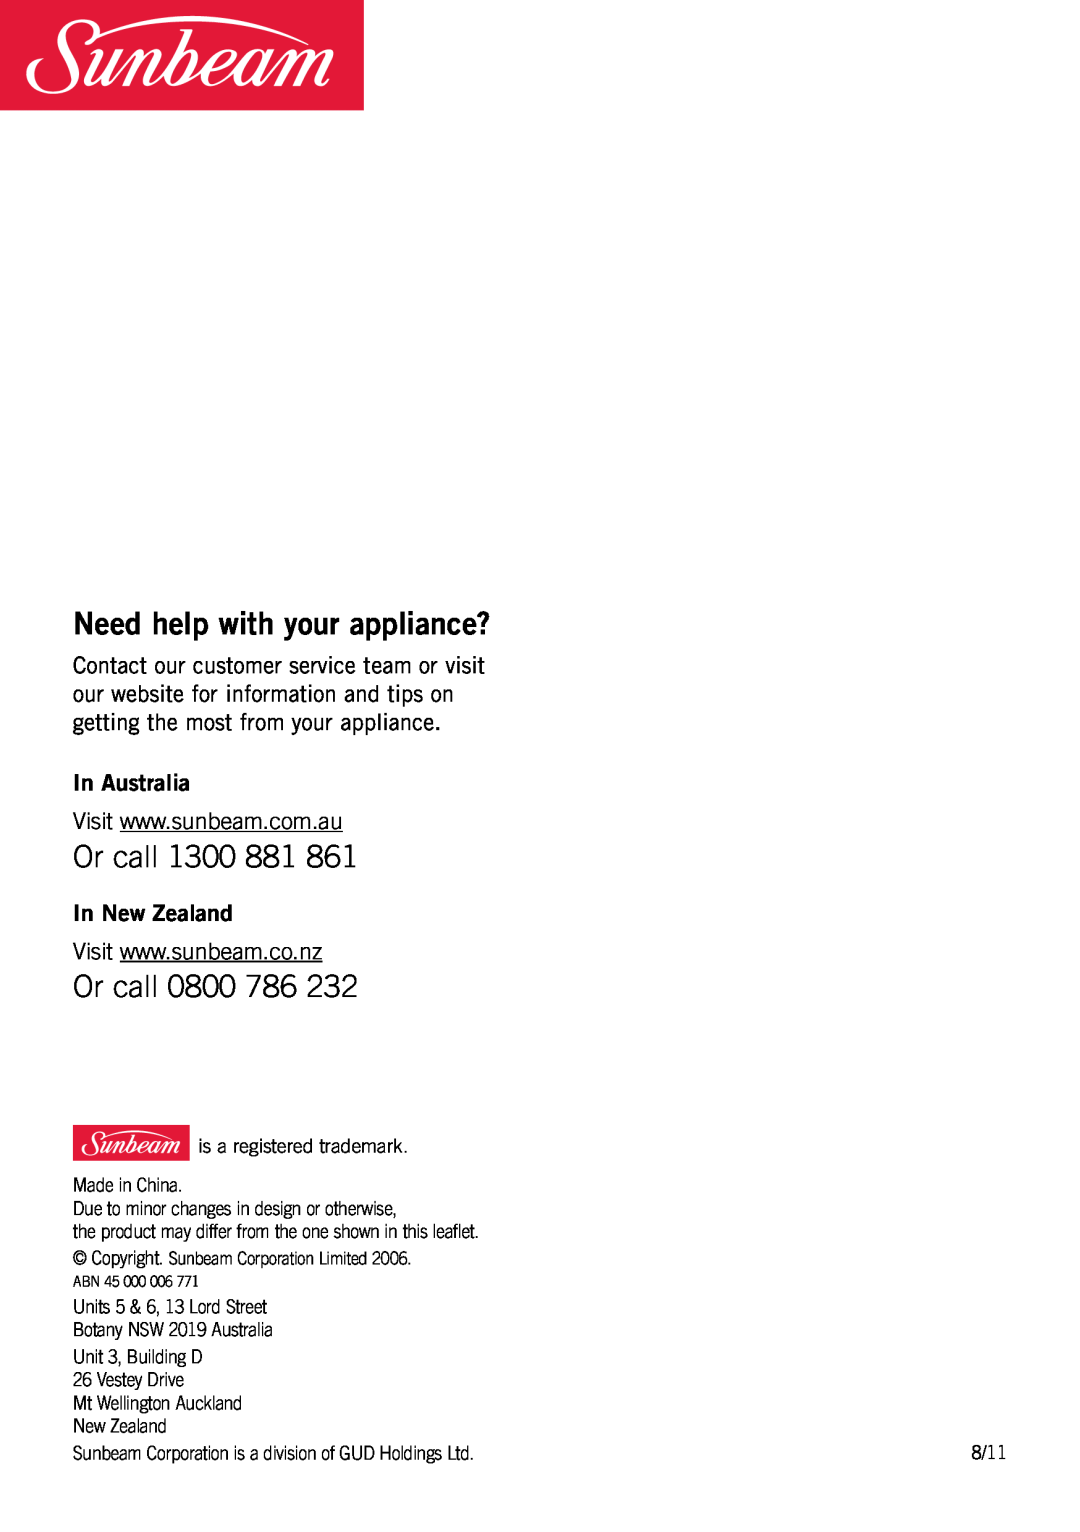 Sunbeam BM7800 manual Need help with your appliance?, Or call 1300 881, Or call 0800 786, In Australia, In New Zealand 